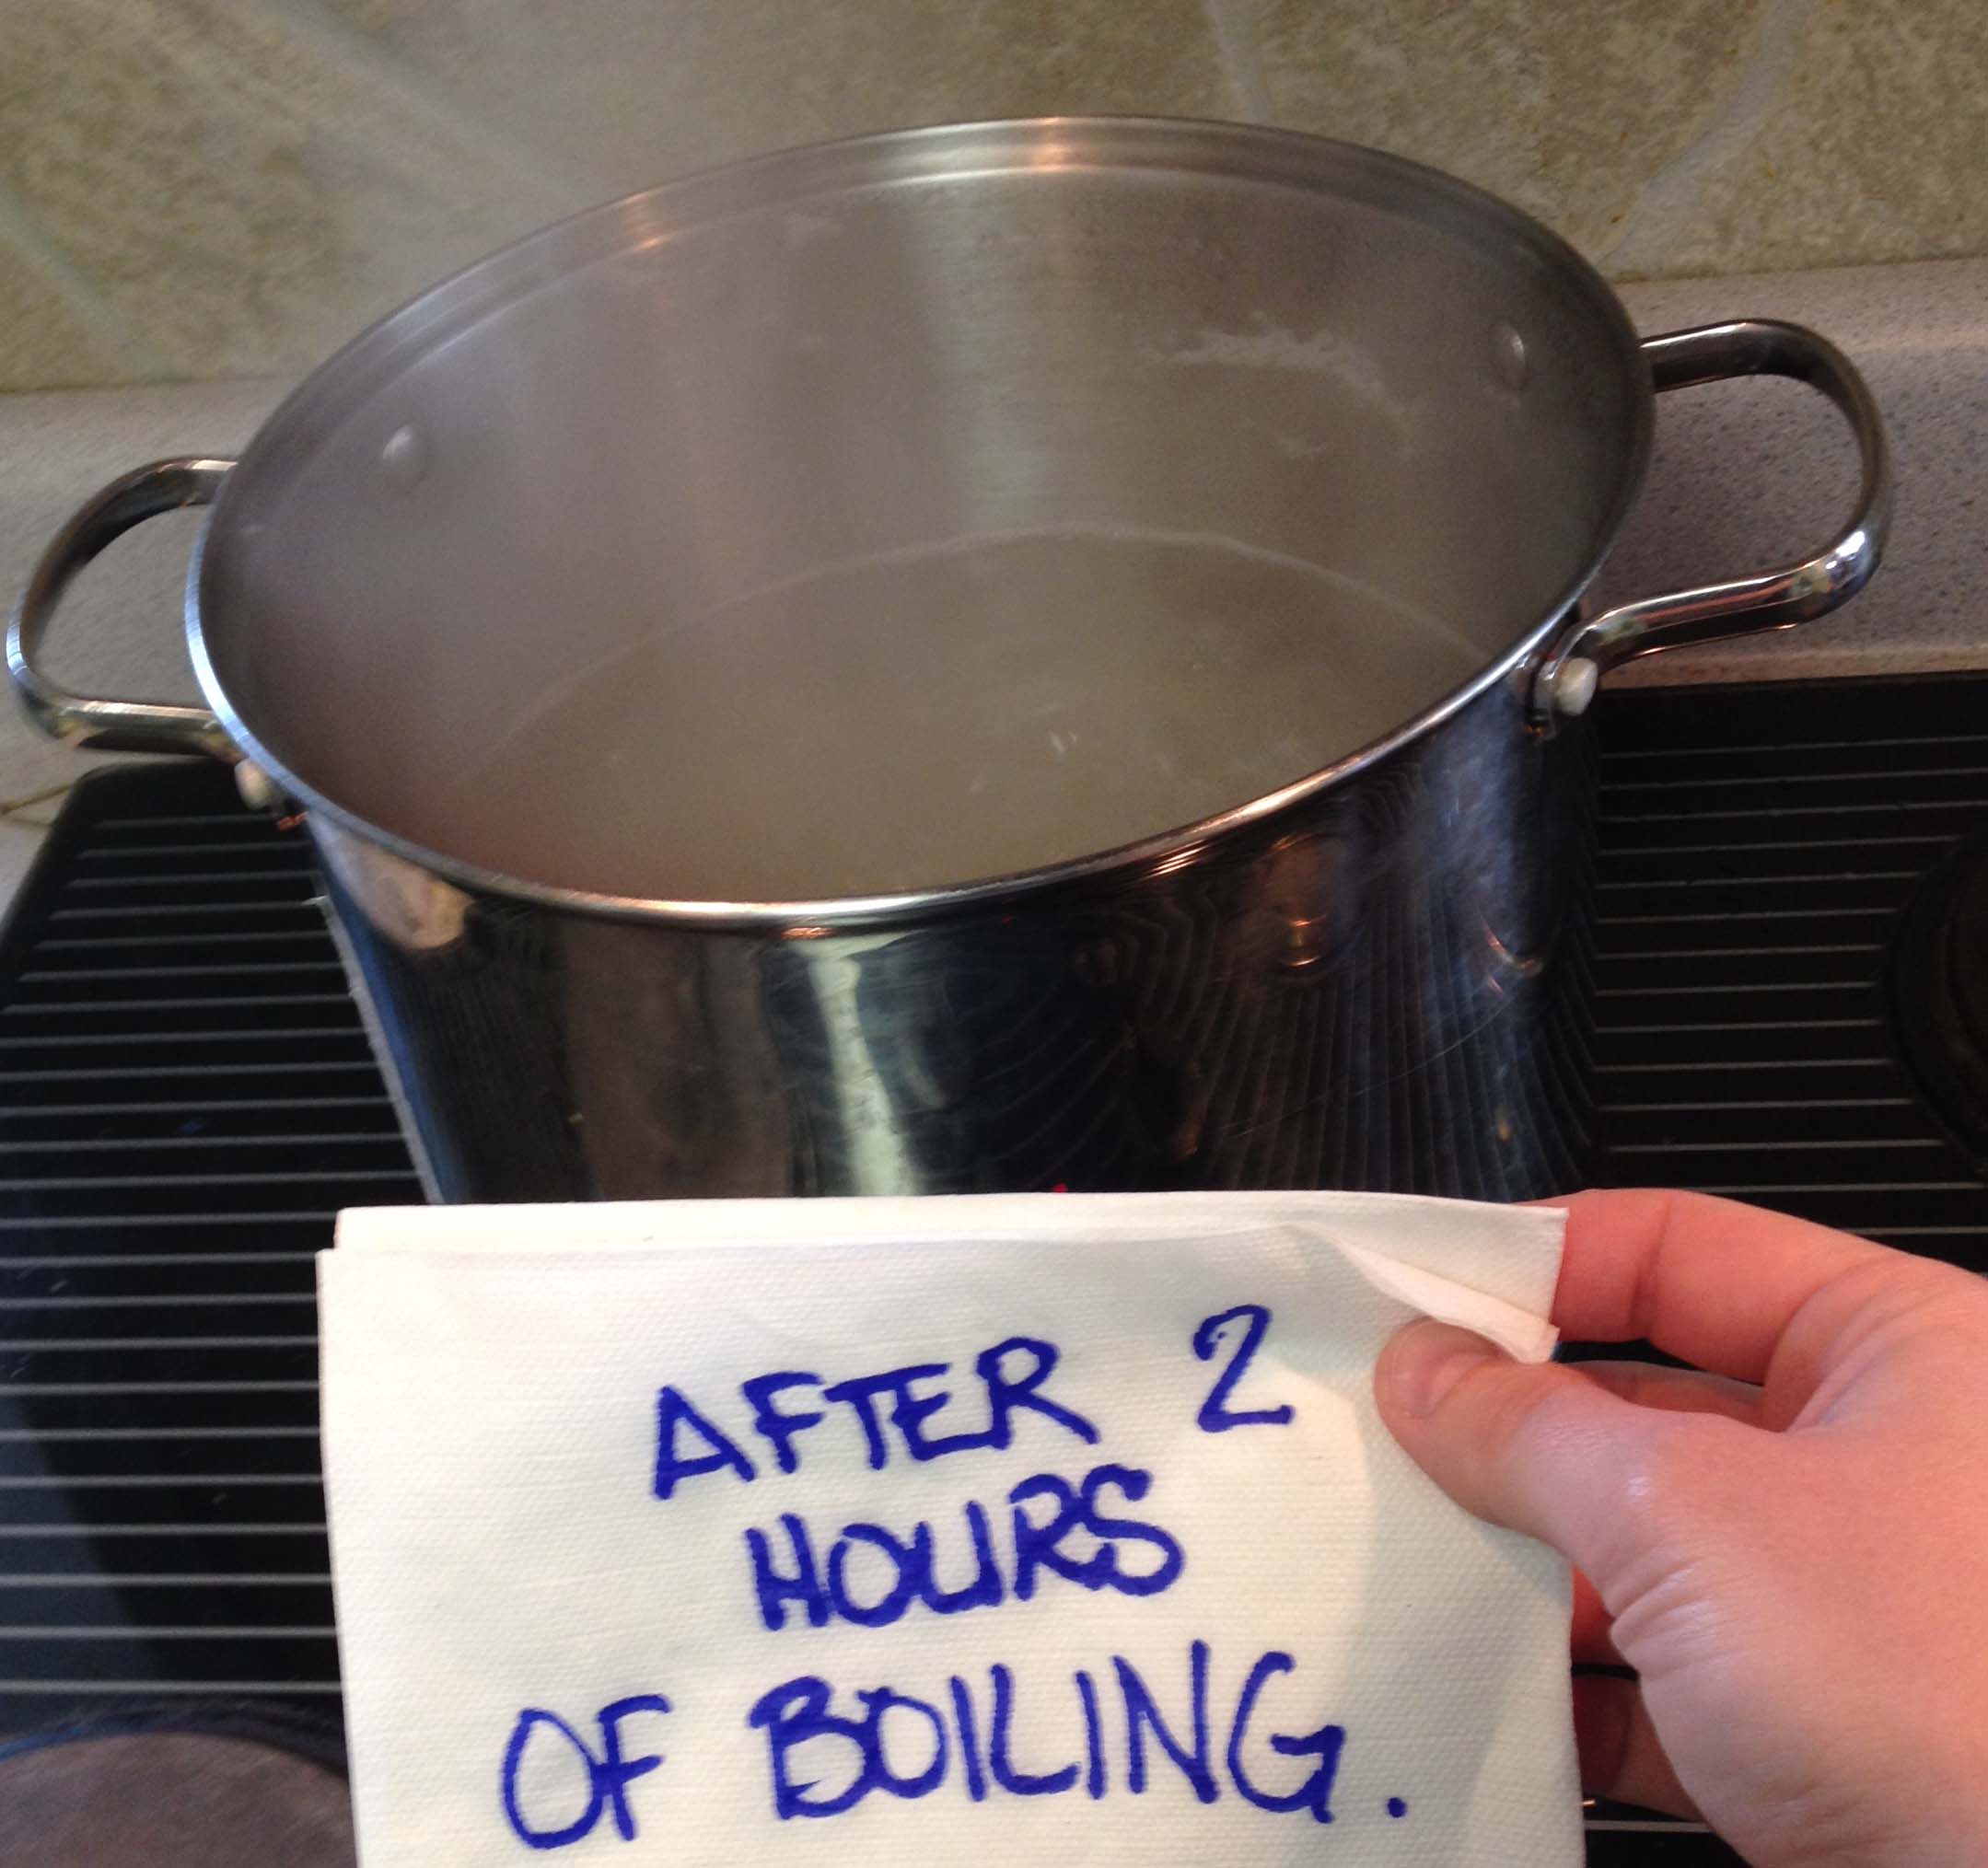 Boiling sap for syrup.